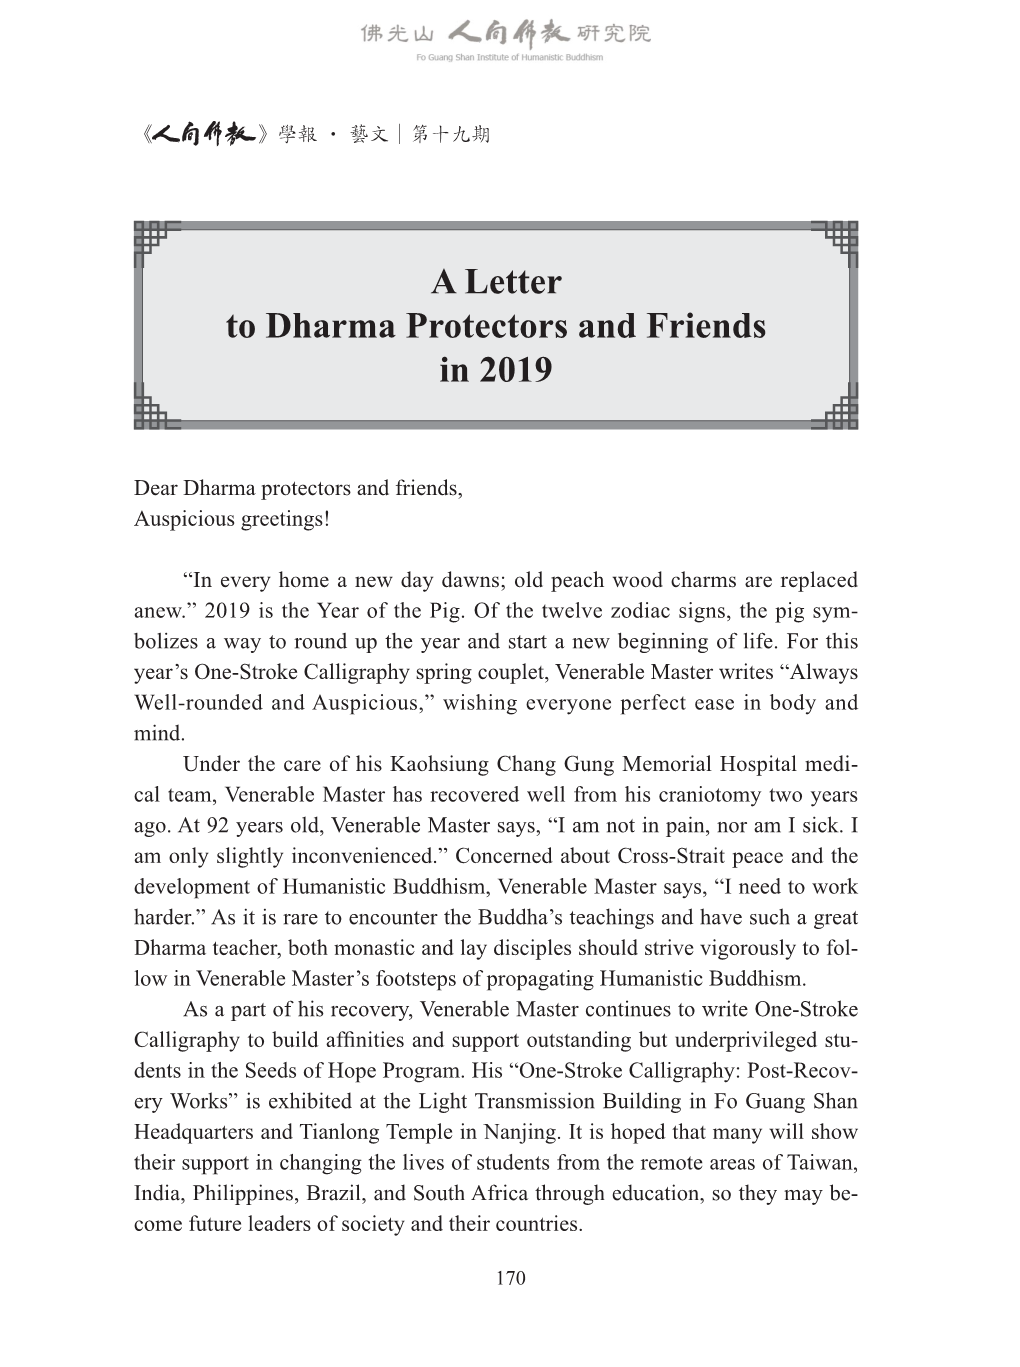 A Letter to Dharma Protectors and Friends in 2019